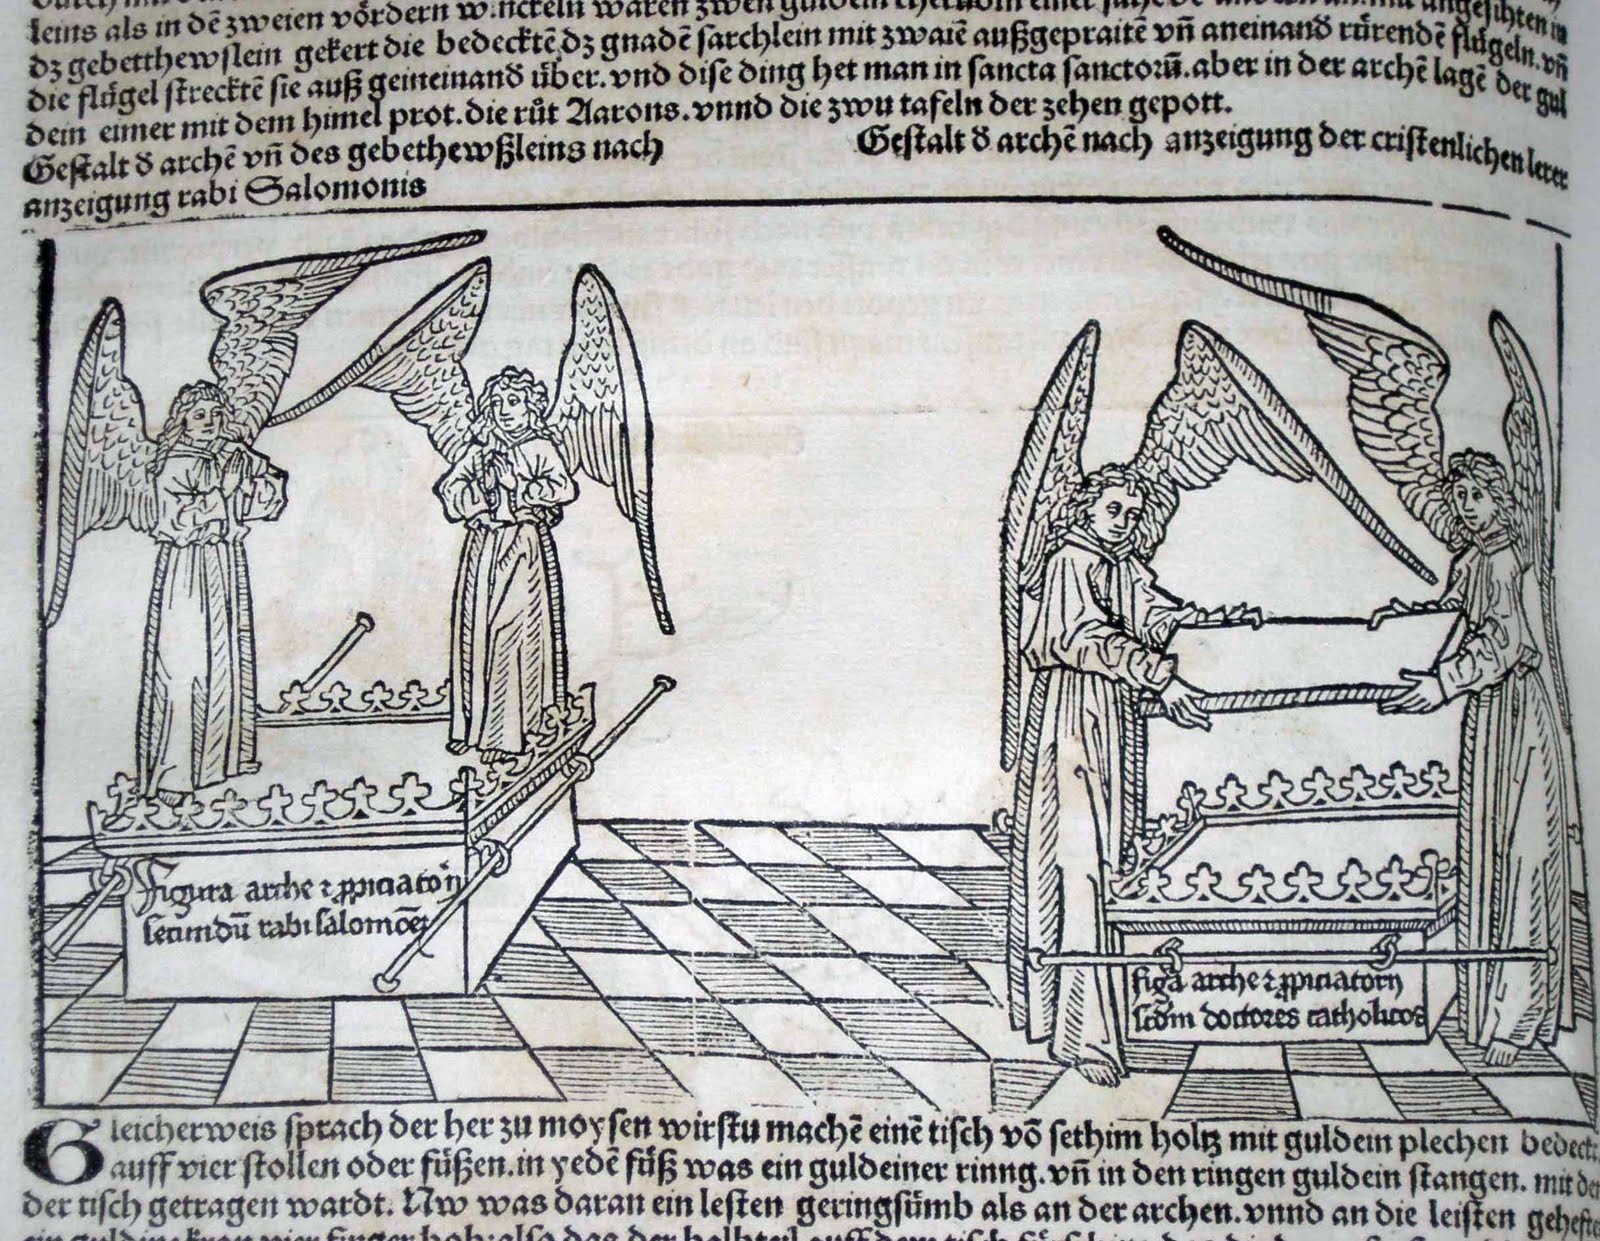 Excerpt of a page from the German edition of The Nuremberg Chronicles with illustration containing 4 angels